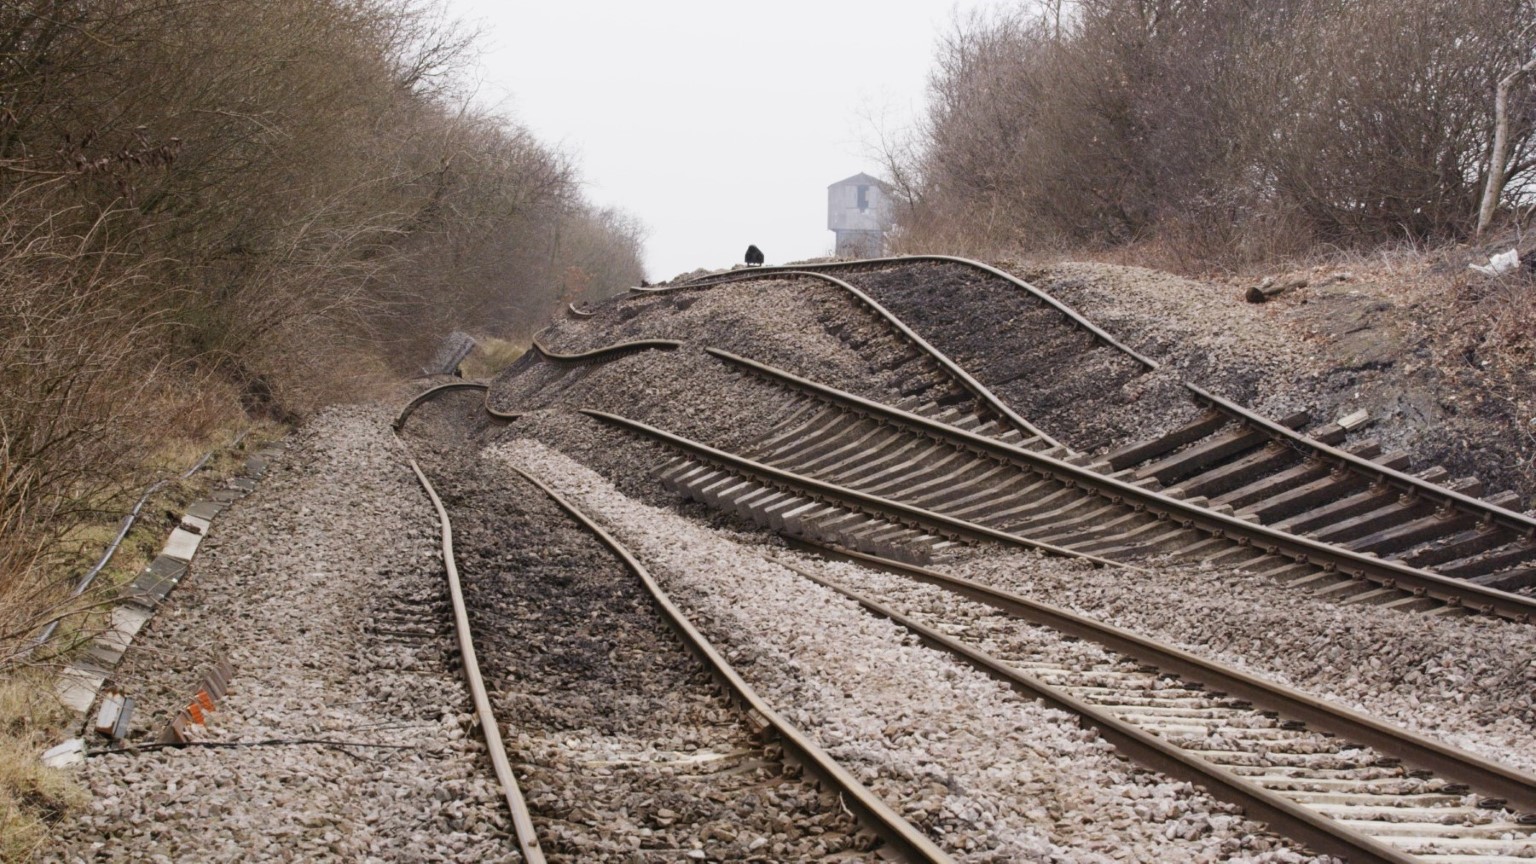 Huge rotational landslide which has caused the railway to move and distort. The railway tracks lie buckled and twisted. 